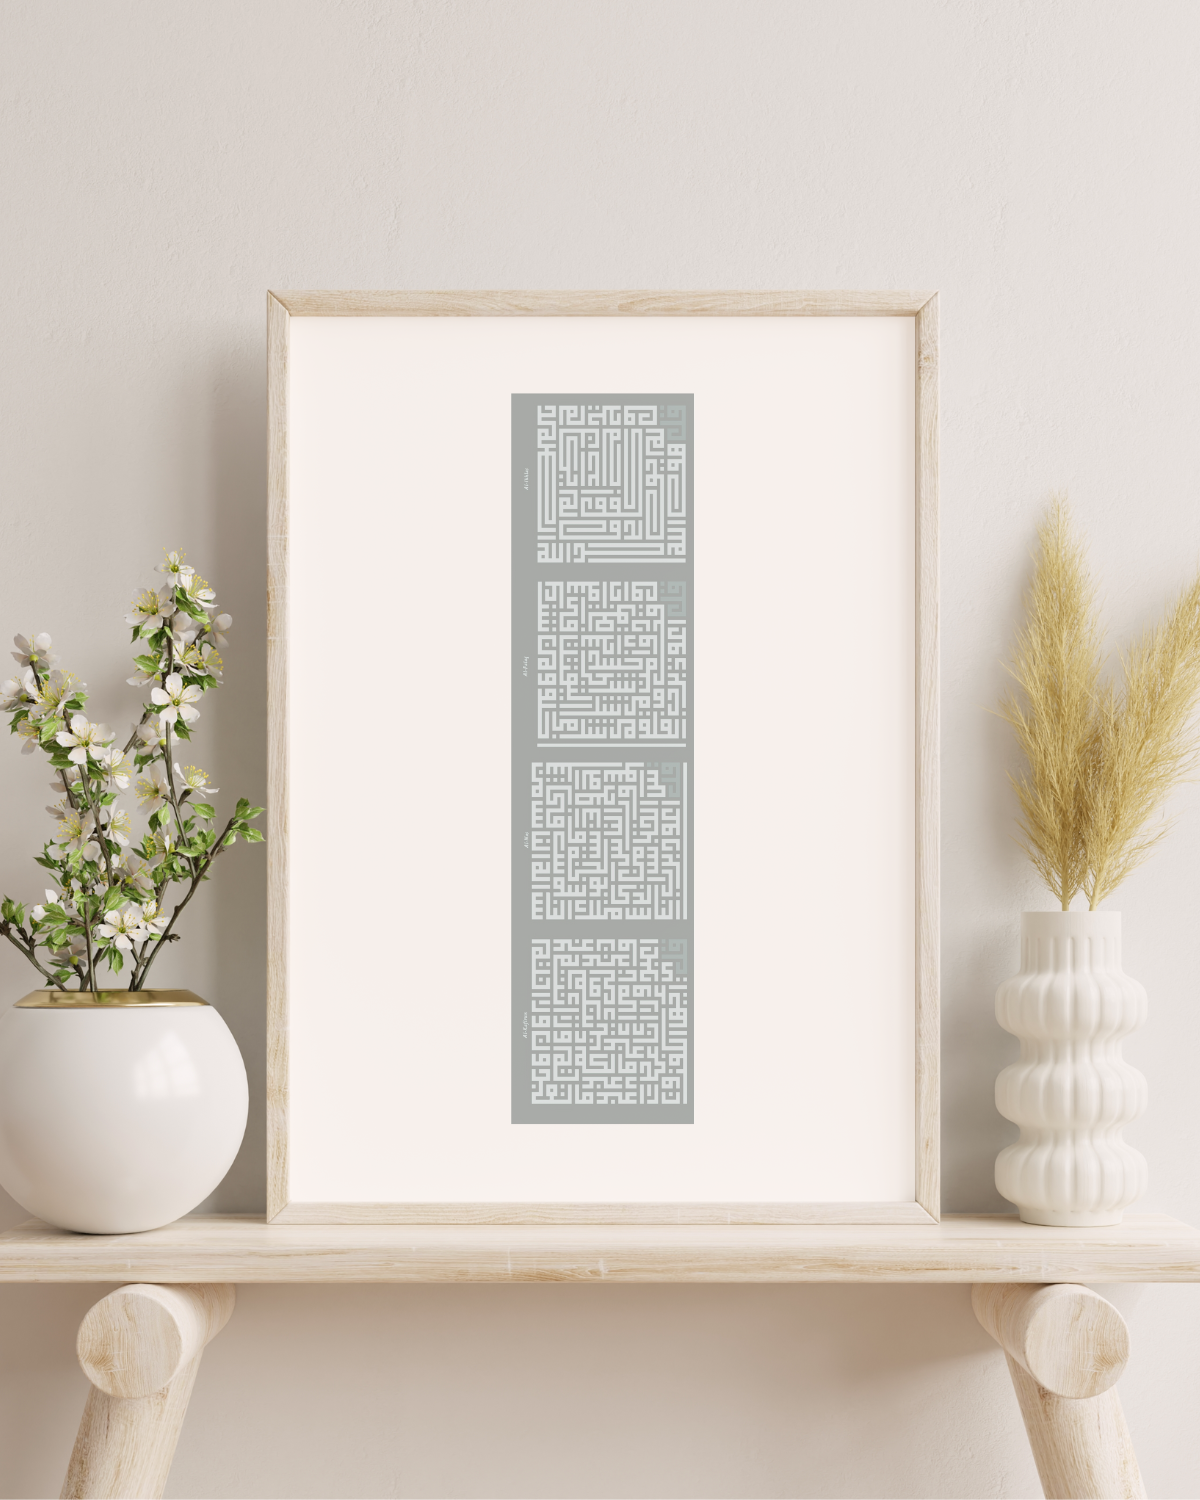 Four "QULs" | Quran | Kufic Square Calligraphy | Beige